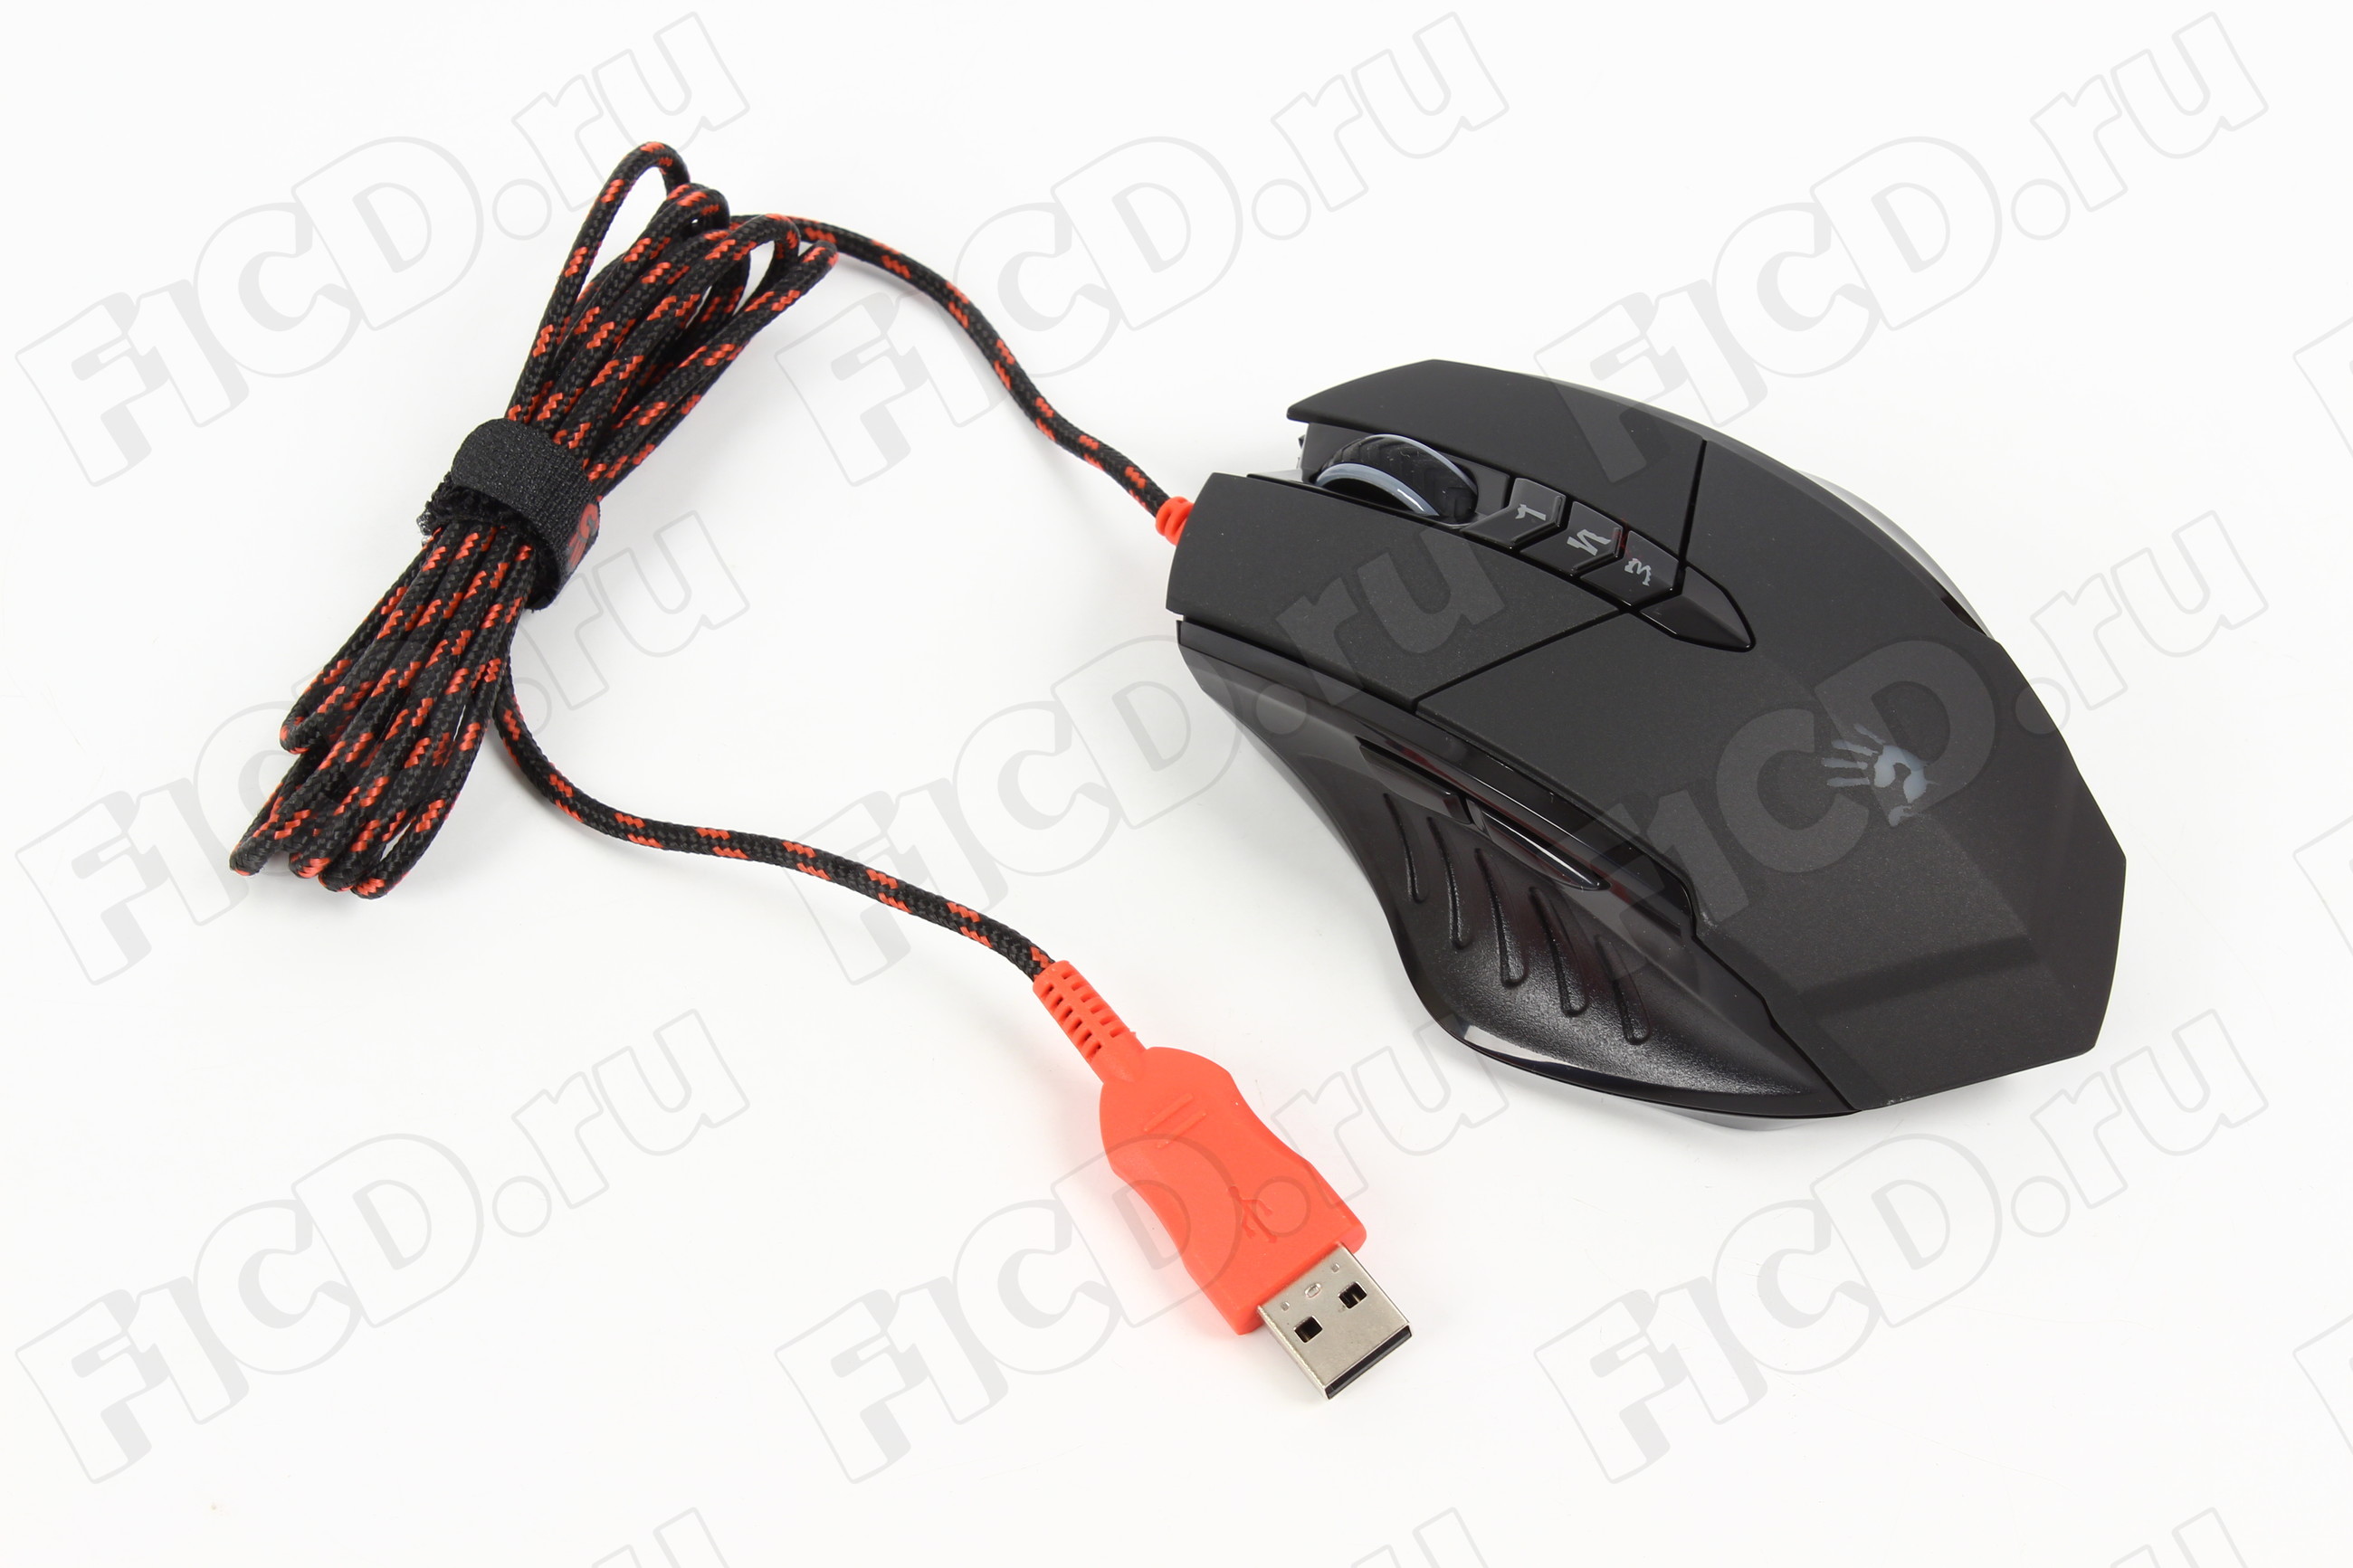 Eac blacklisted device bloody mouse a4tech rust фото 37